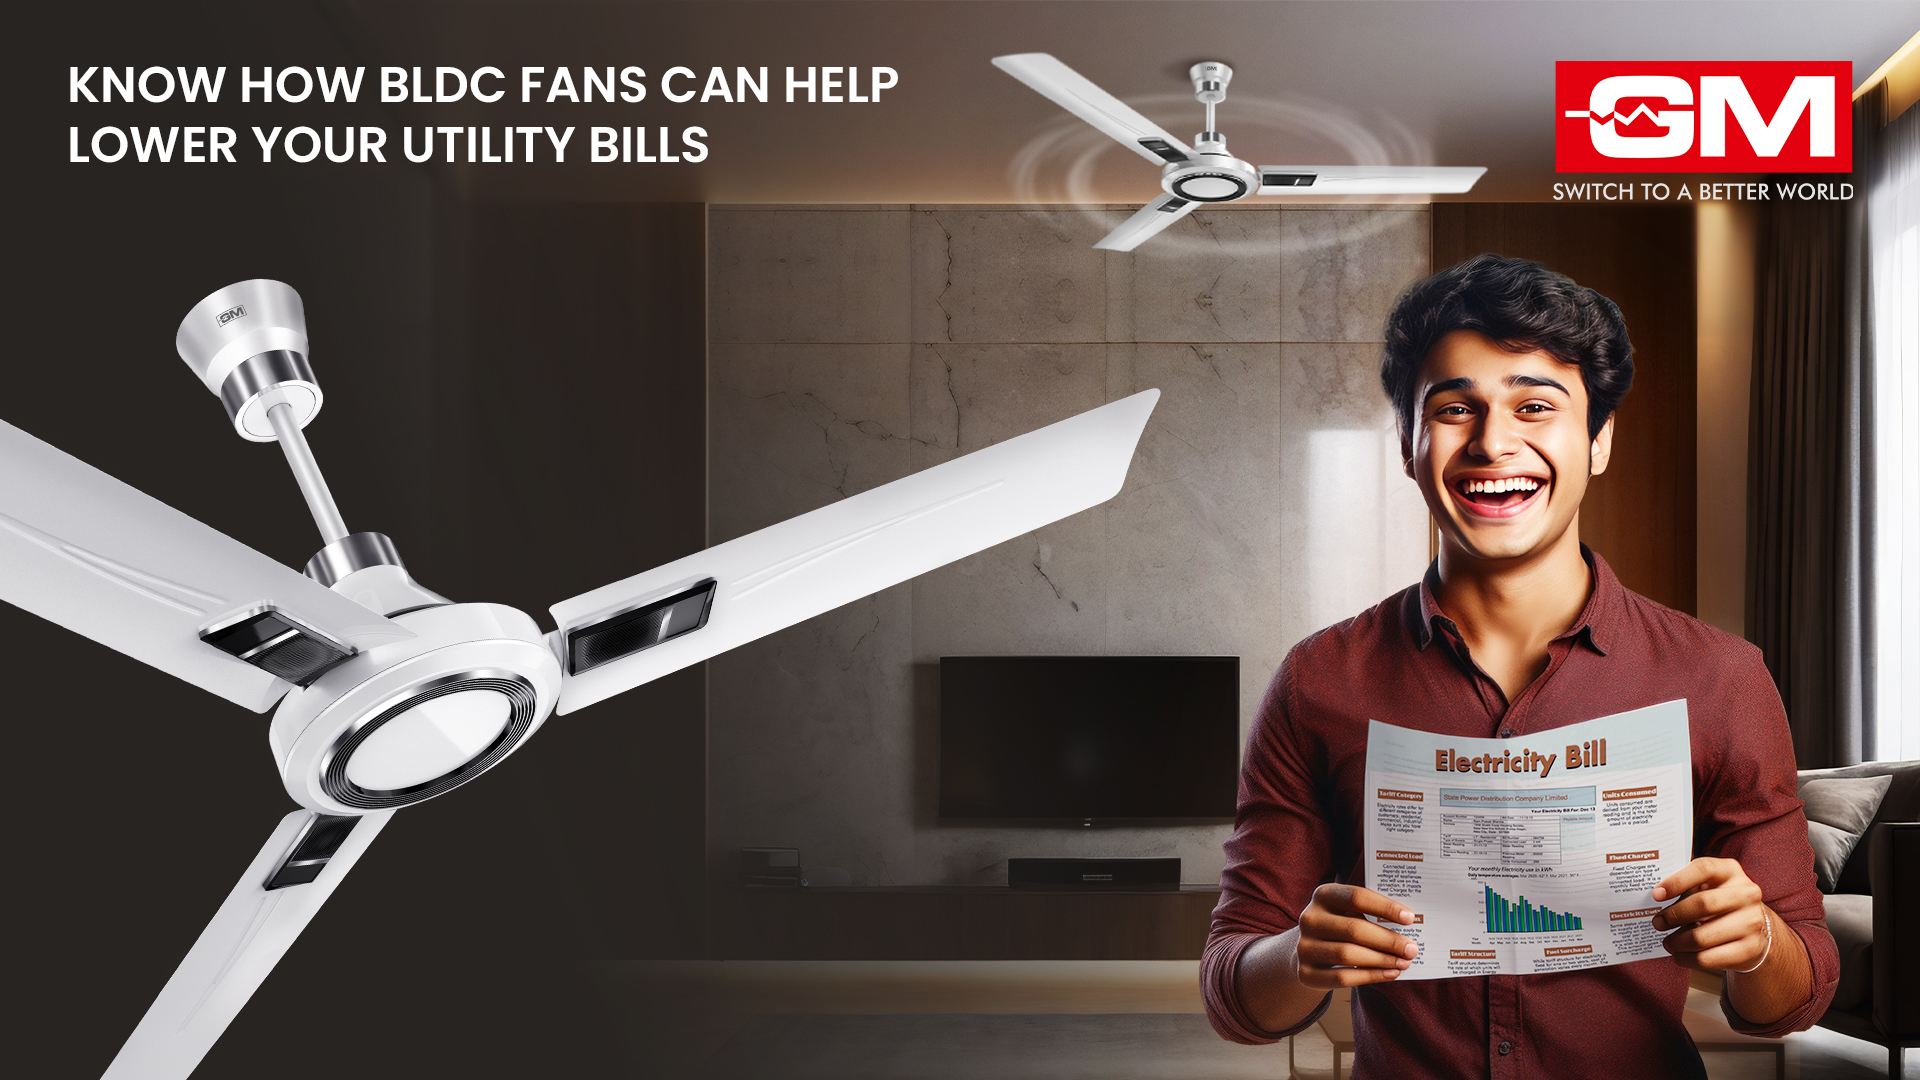 Here's How BLDC Fans Can Help Lower Your Utility Bills